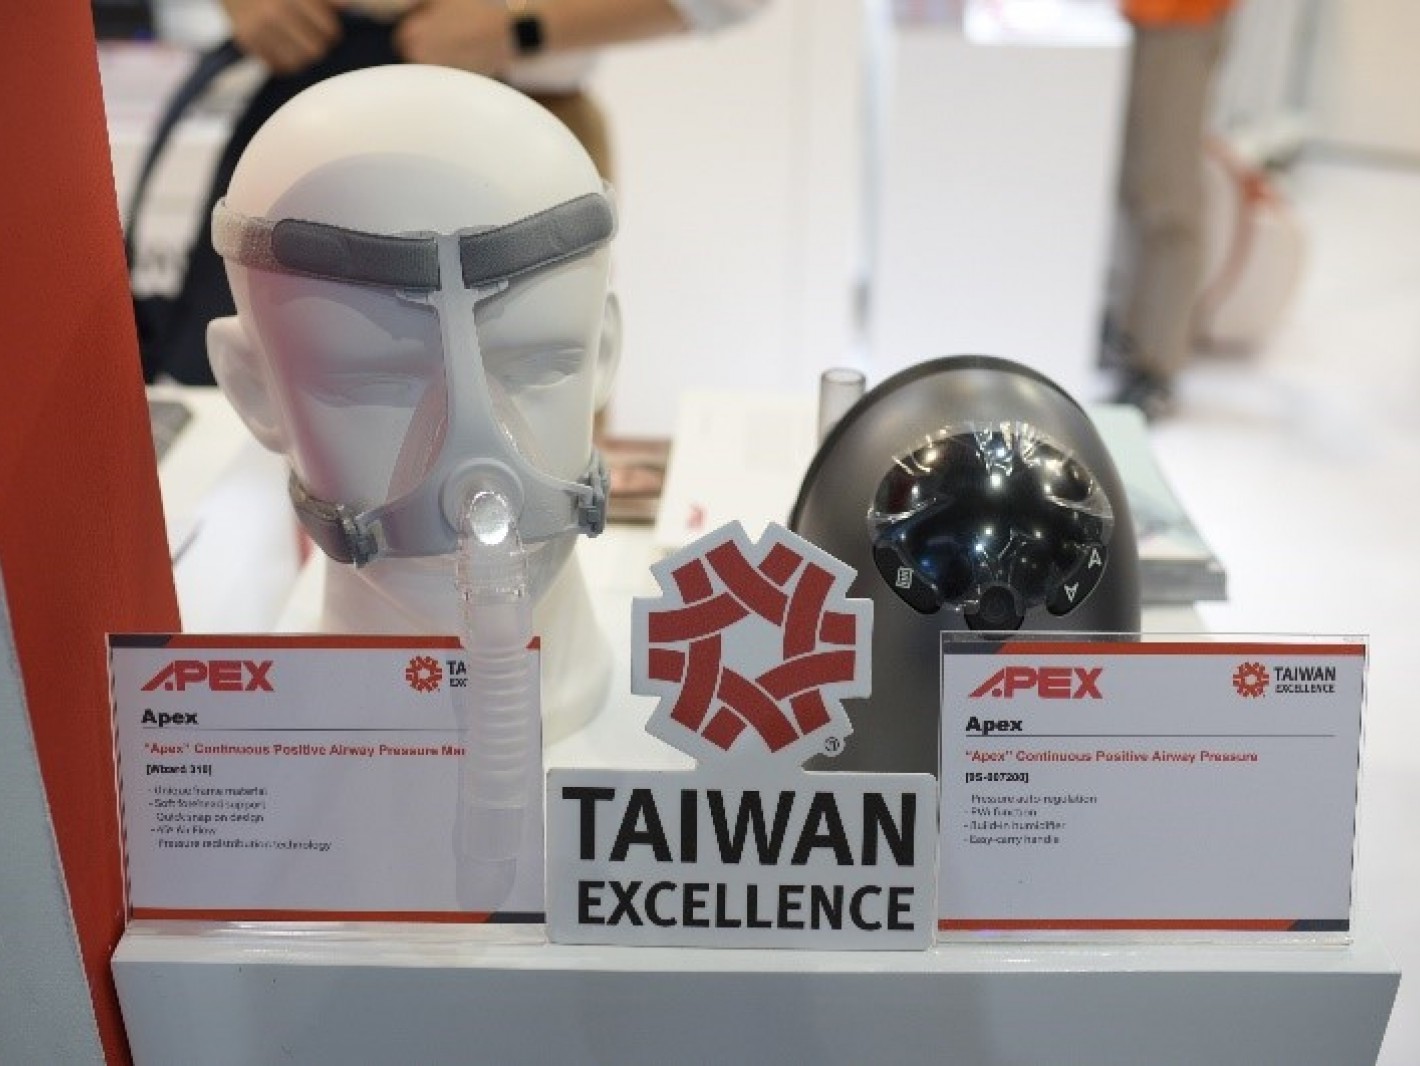 APEX joined the Taiwan Excellence Pavilion and presented CPAP and mask products at the 2019 Indonesian Hospital Expo.